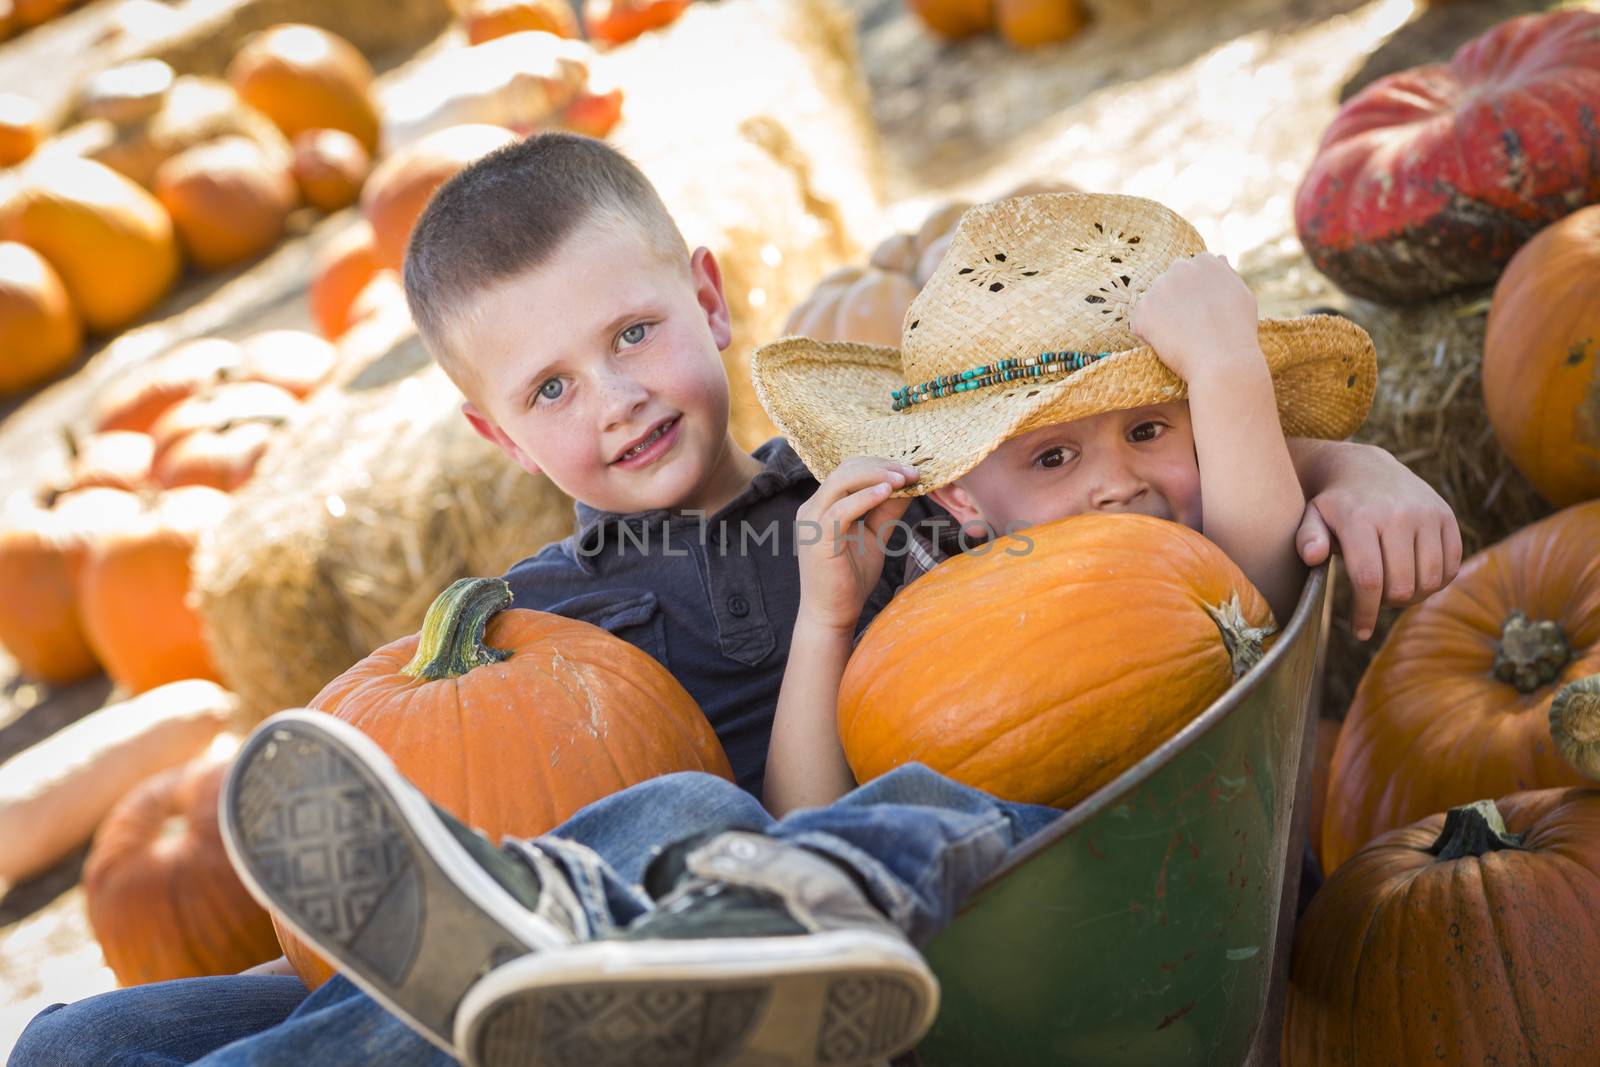 Two Little Boys Playing in Wheelbarrow at the Pumpkin Patch in a Rustic Country Setting.